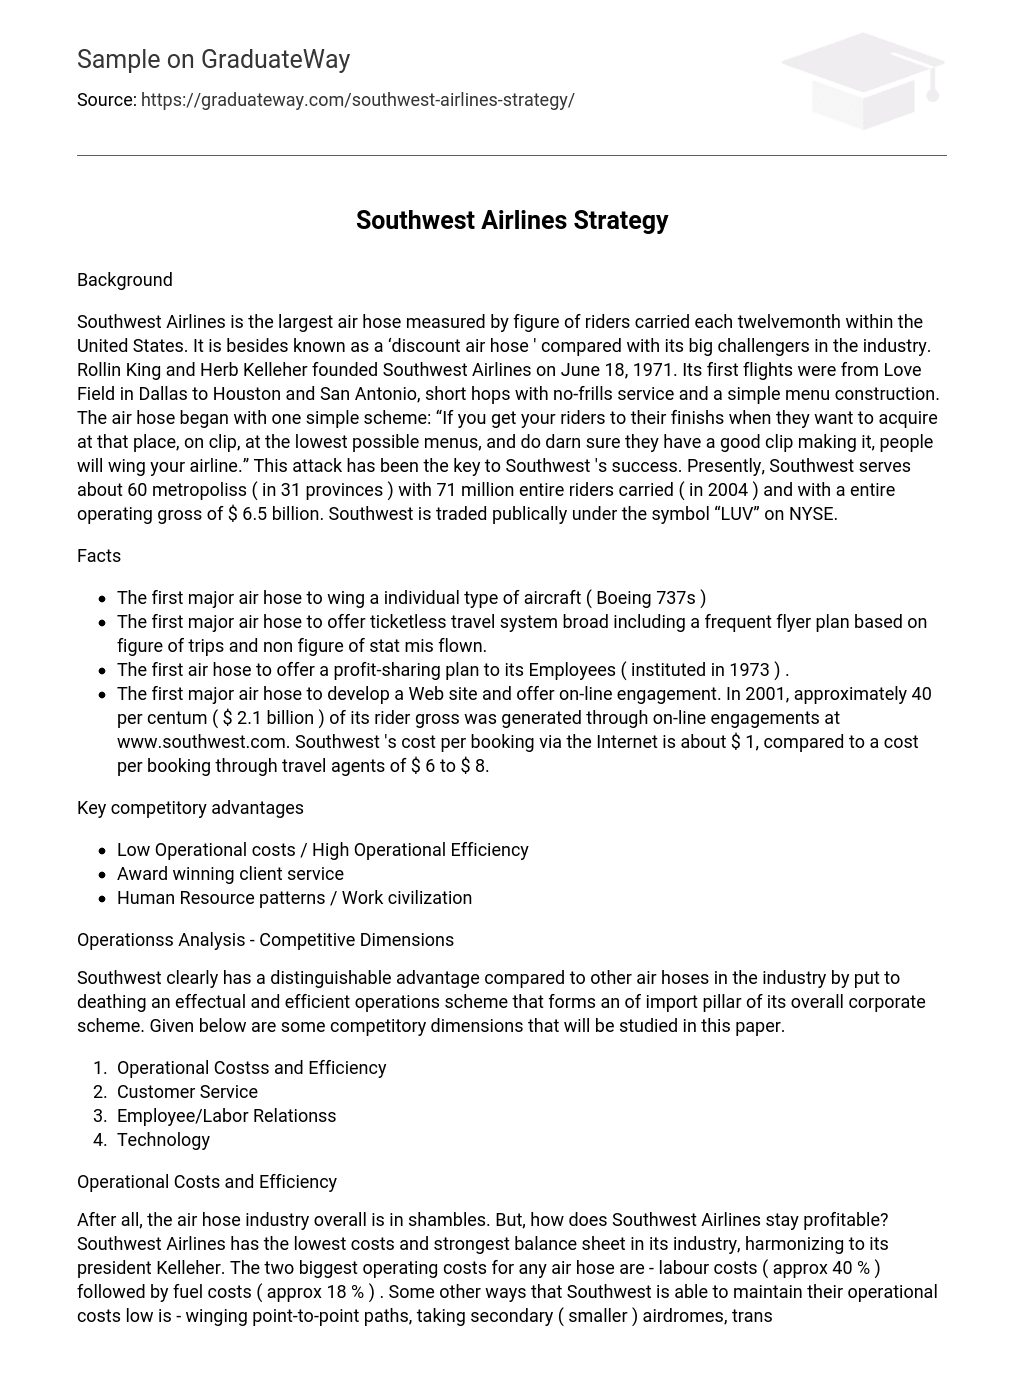 Southwest Airlines Strategy